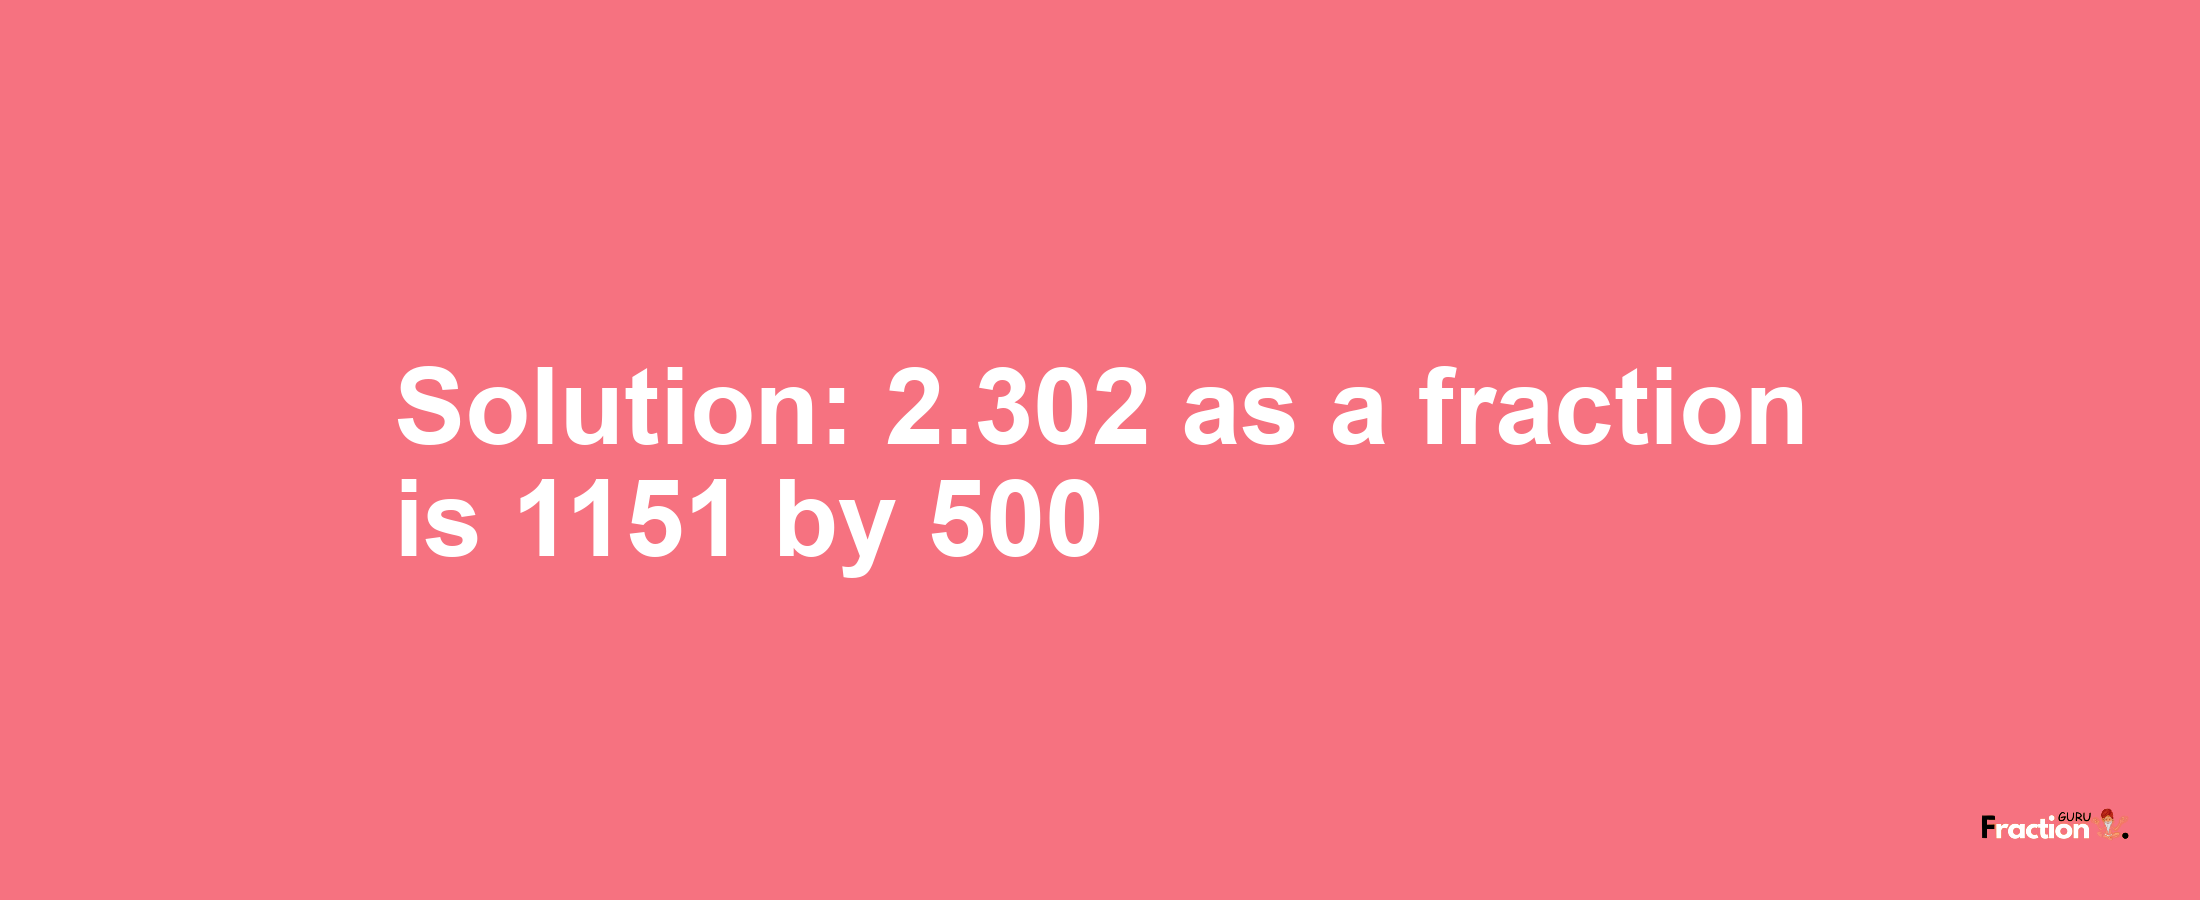 Solution:2.302 as a fraction is 1151/500